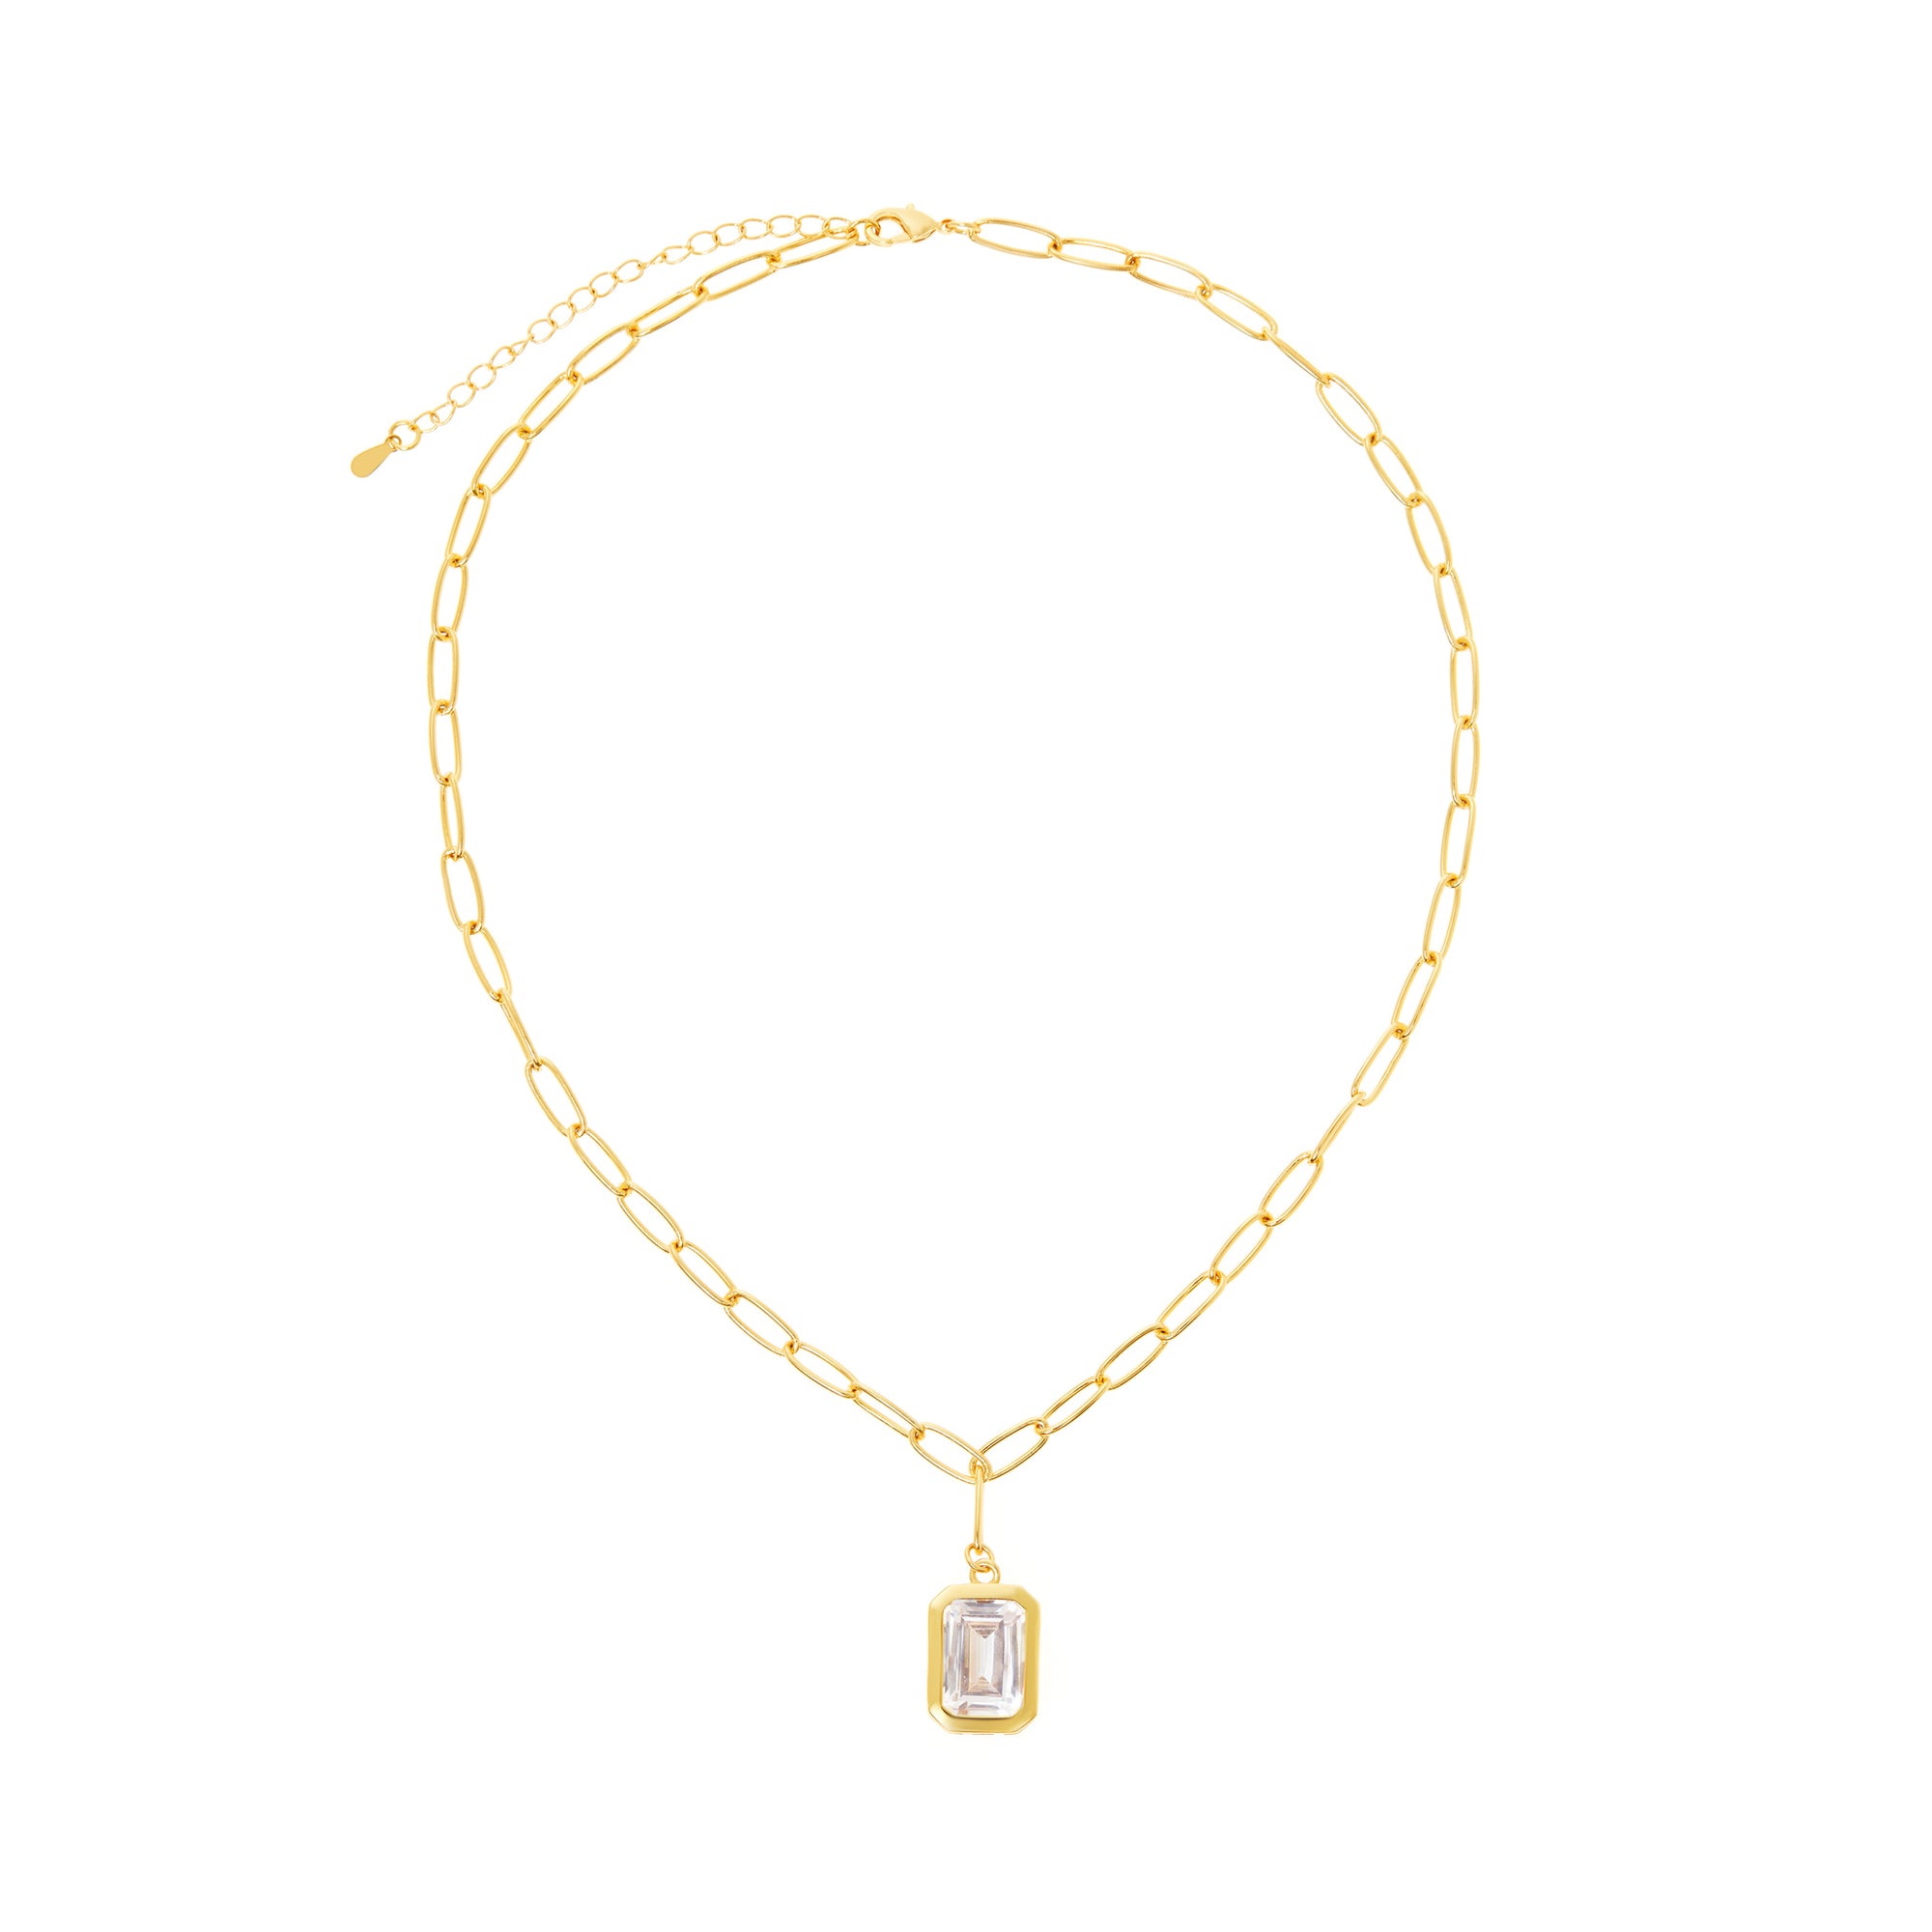 Necklace 'Piped Edge' – Crystal